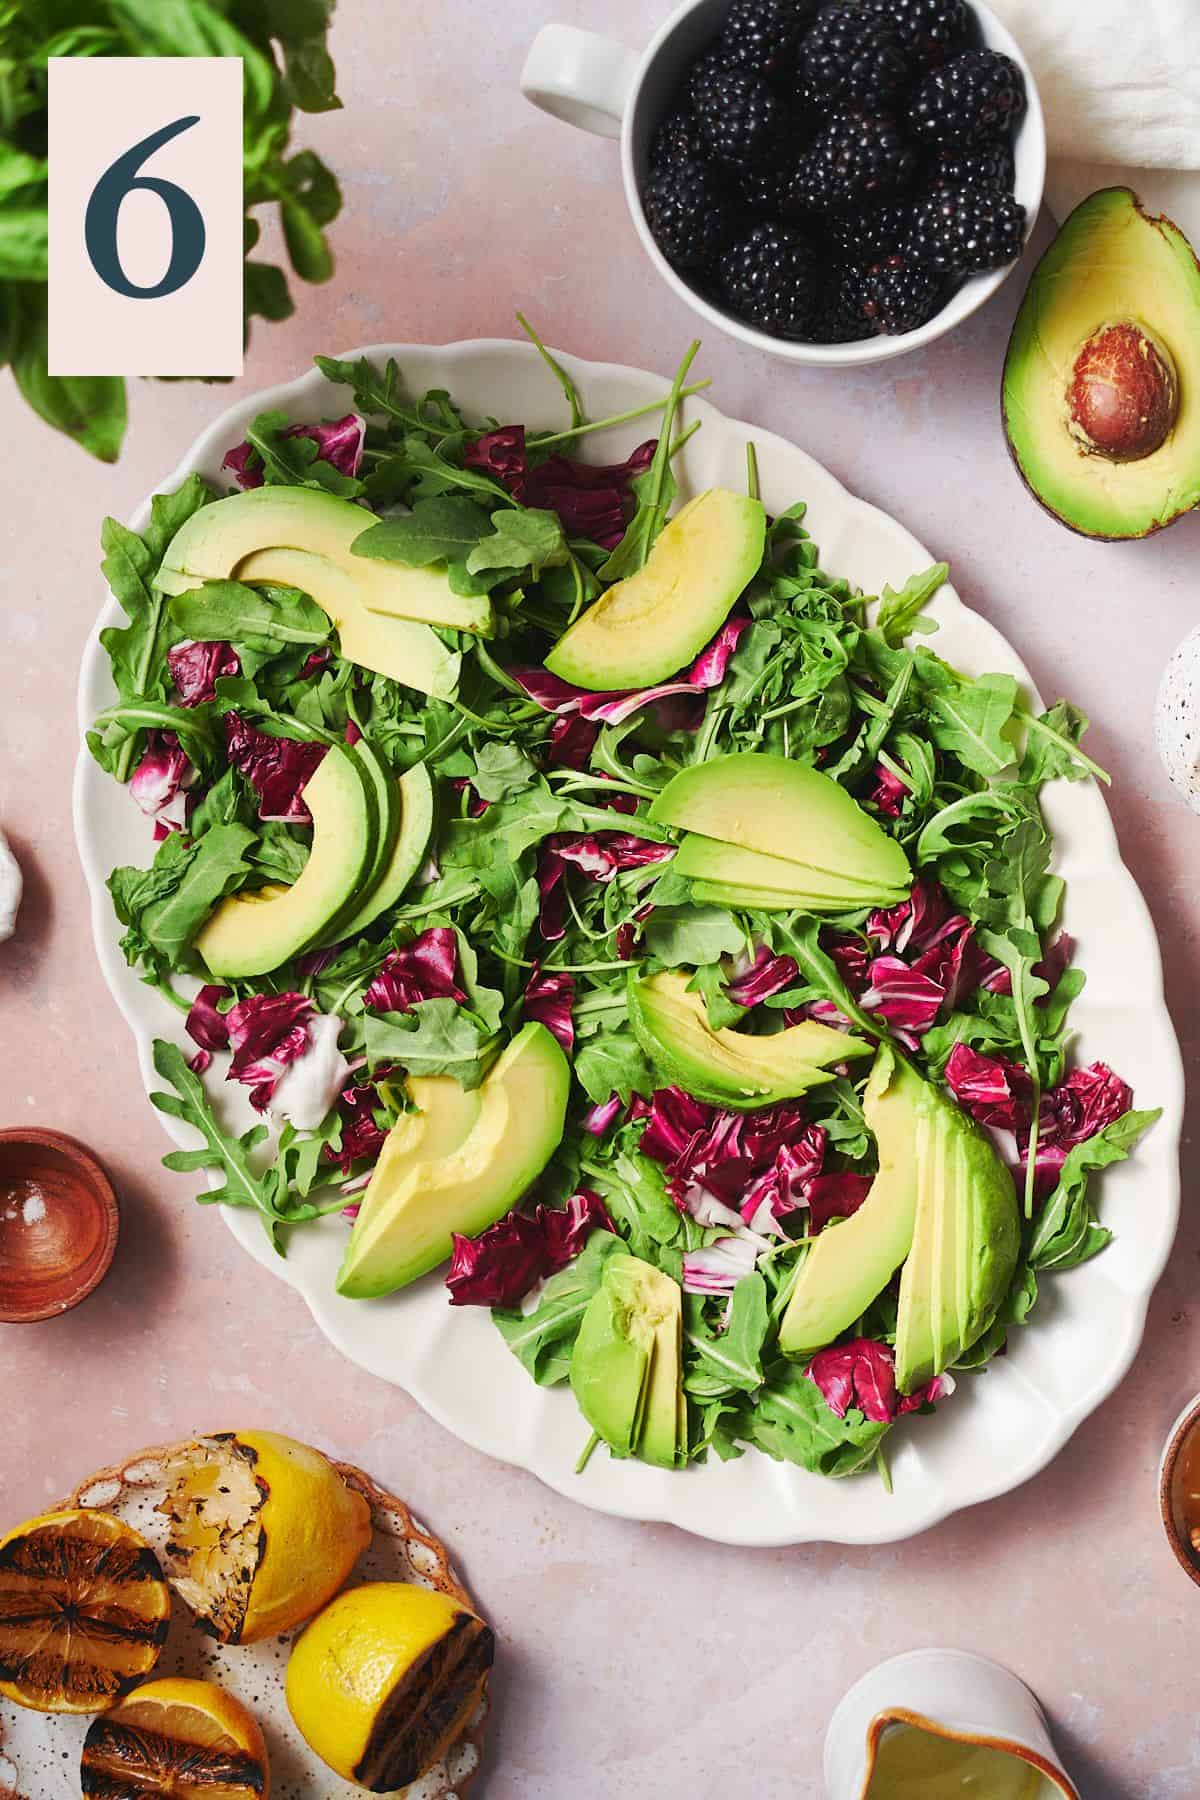 Arugula, radicchio, and avocado layered onto a ruffled plate surrounded by other ingredients to make a salad.  